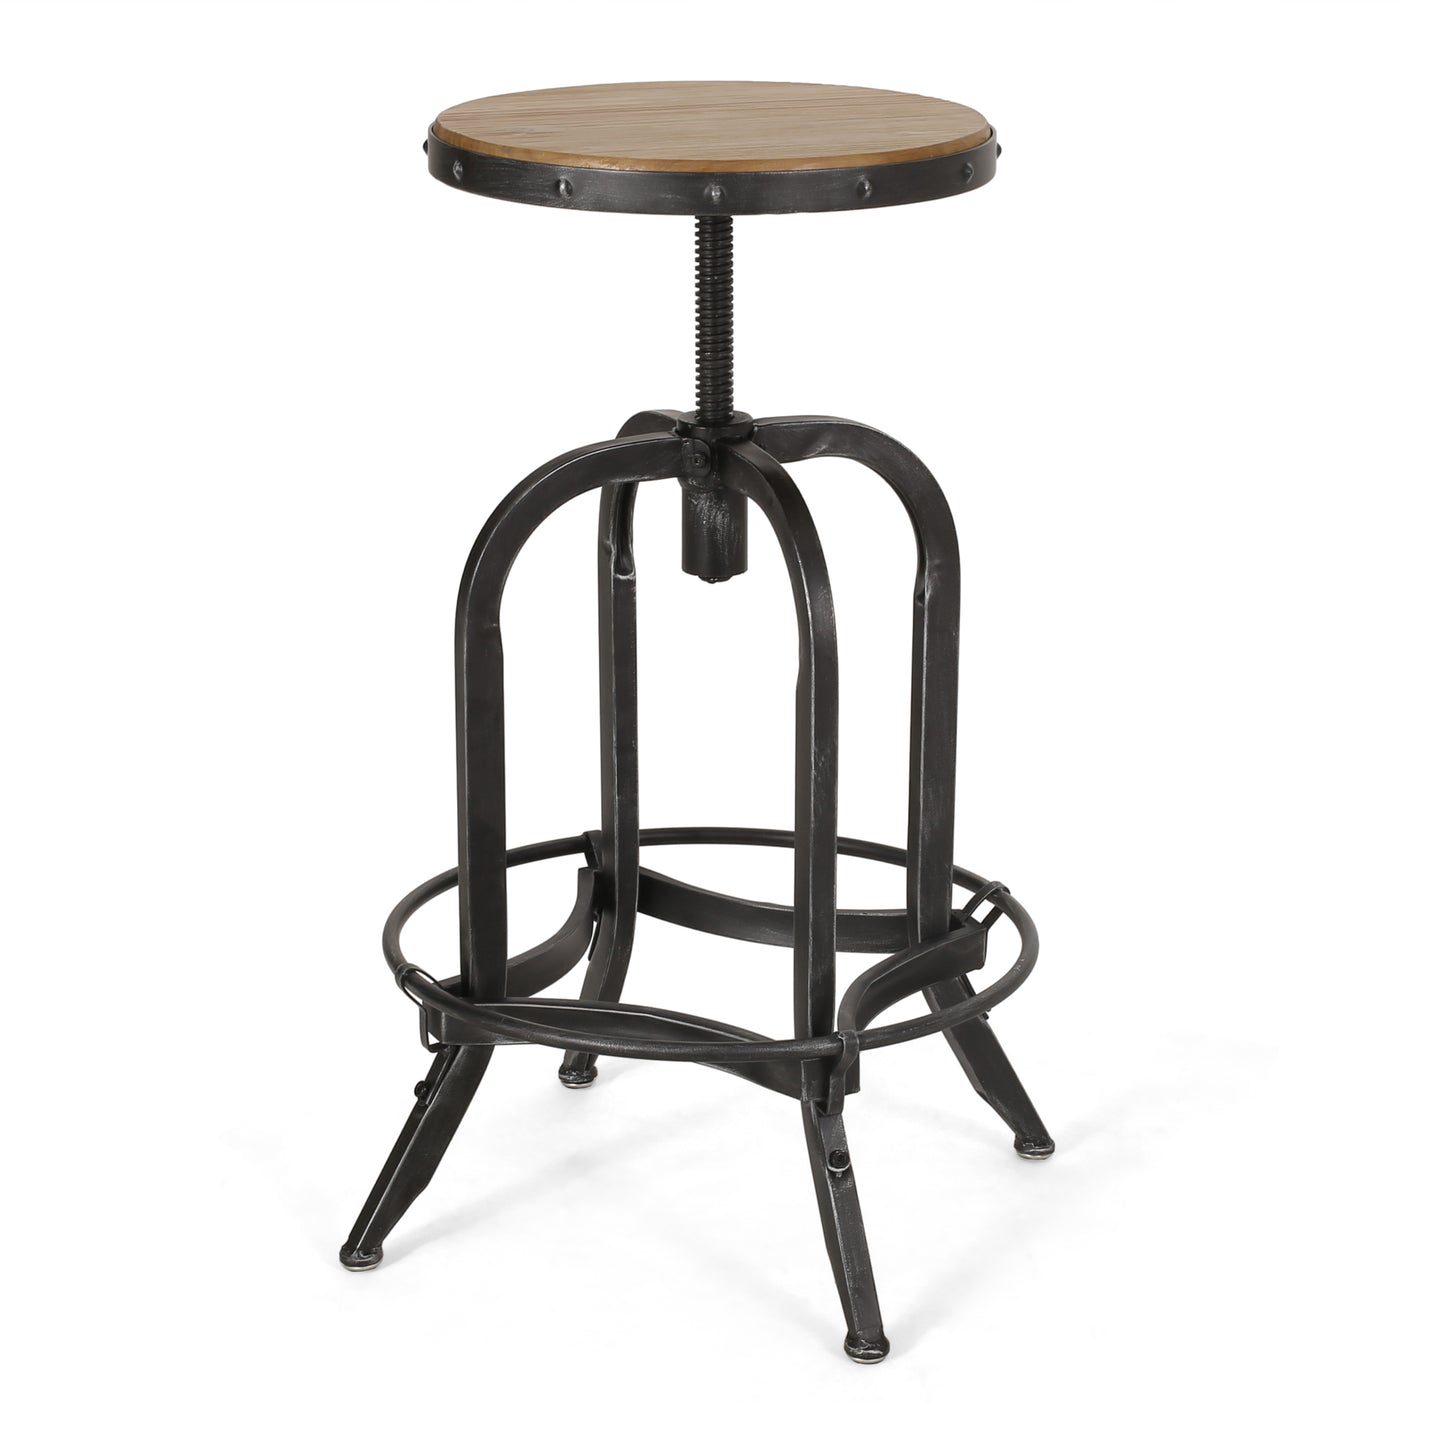 Cedarville Industrial Firwood Adjustable Height Swivel Barstools, Set of 2, Antique Natural and Pewter